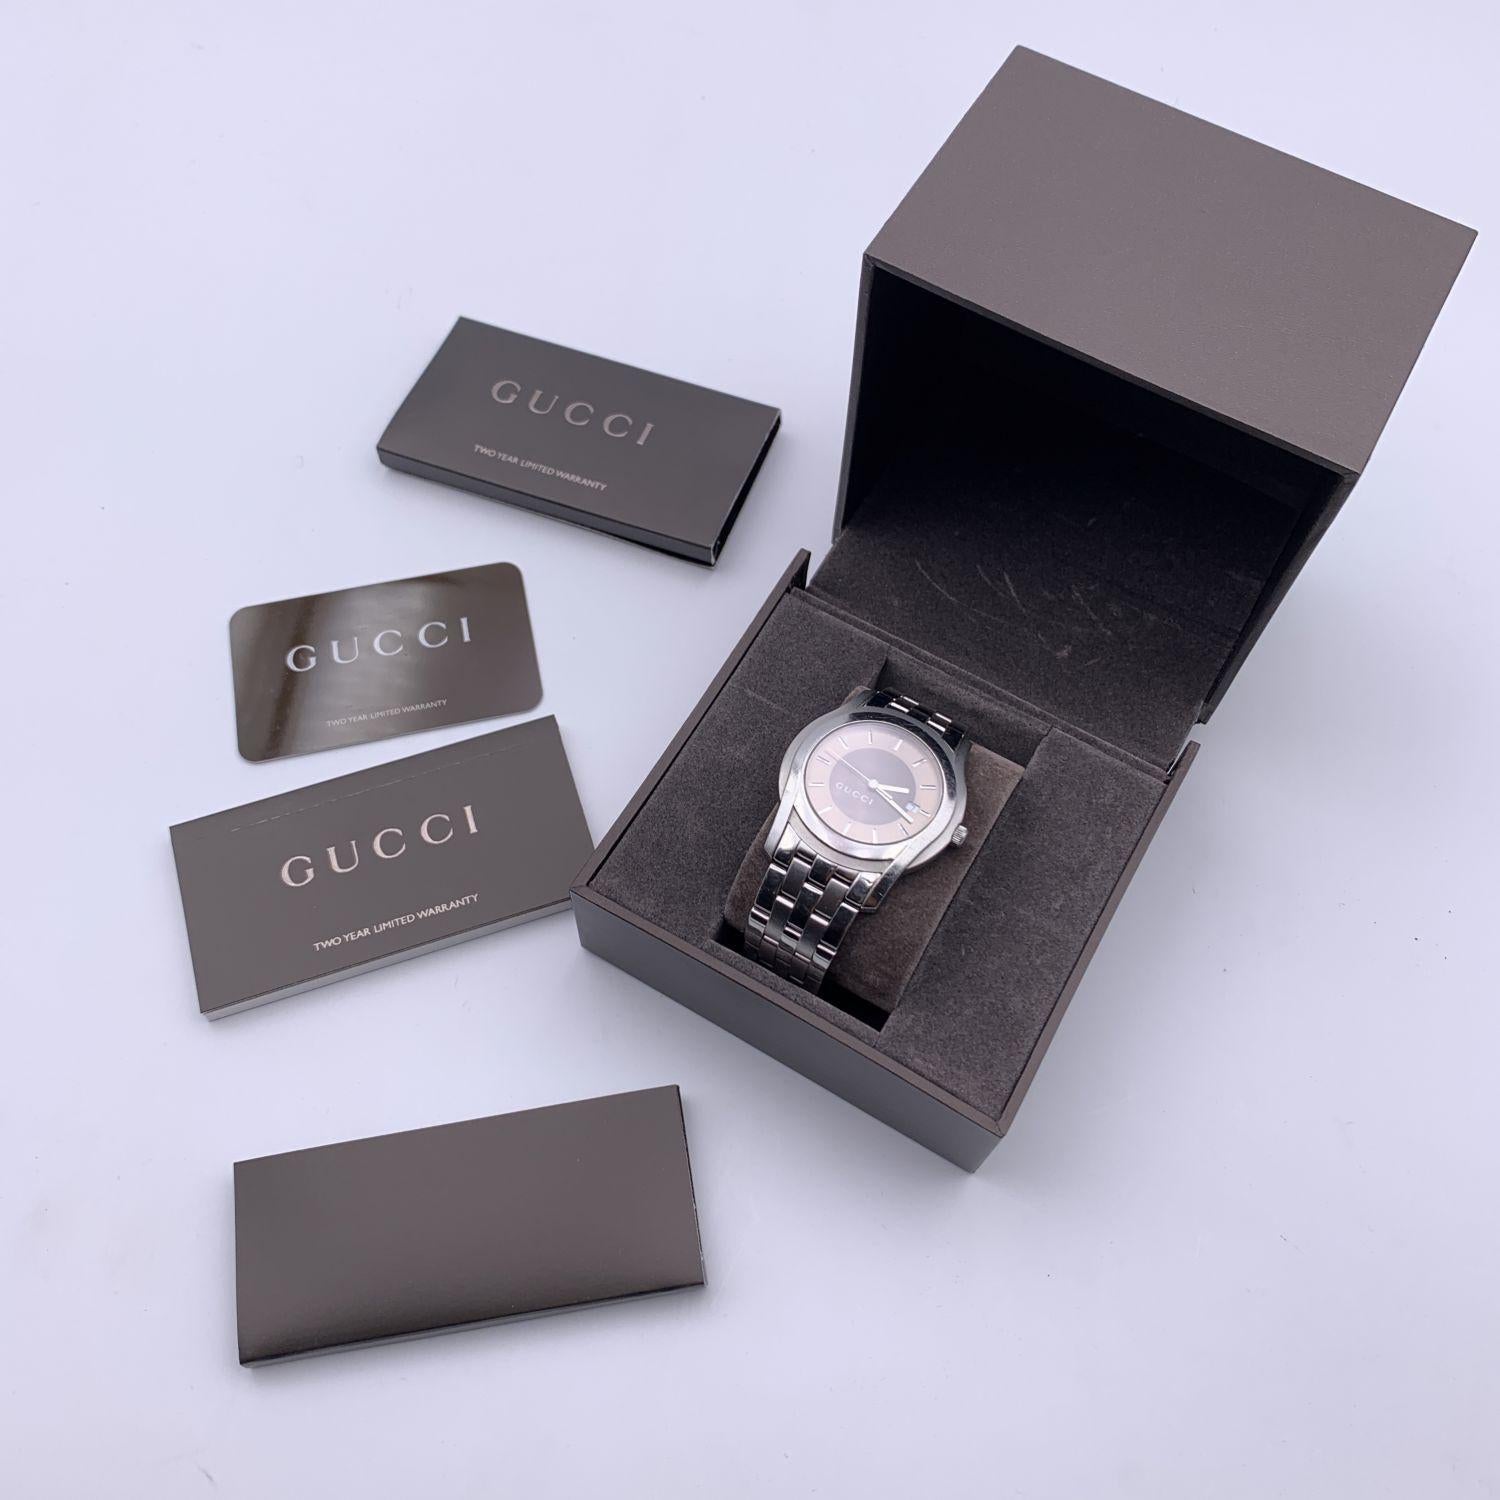 Gucci silver tone stainless steel wrist watch, mod. 5500 XL. Beige and brown bicolor dial. Date at 3 o'clock. Sapphire crystal. Swiss Made Quartz movement. Gucci written on face. Gucci crest on the reverse of the case. GUCCI logo engraved on the